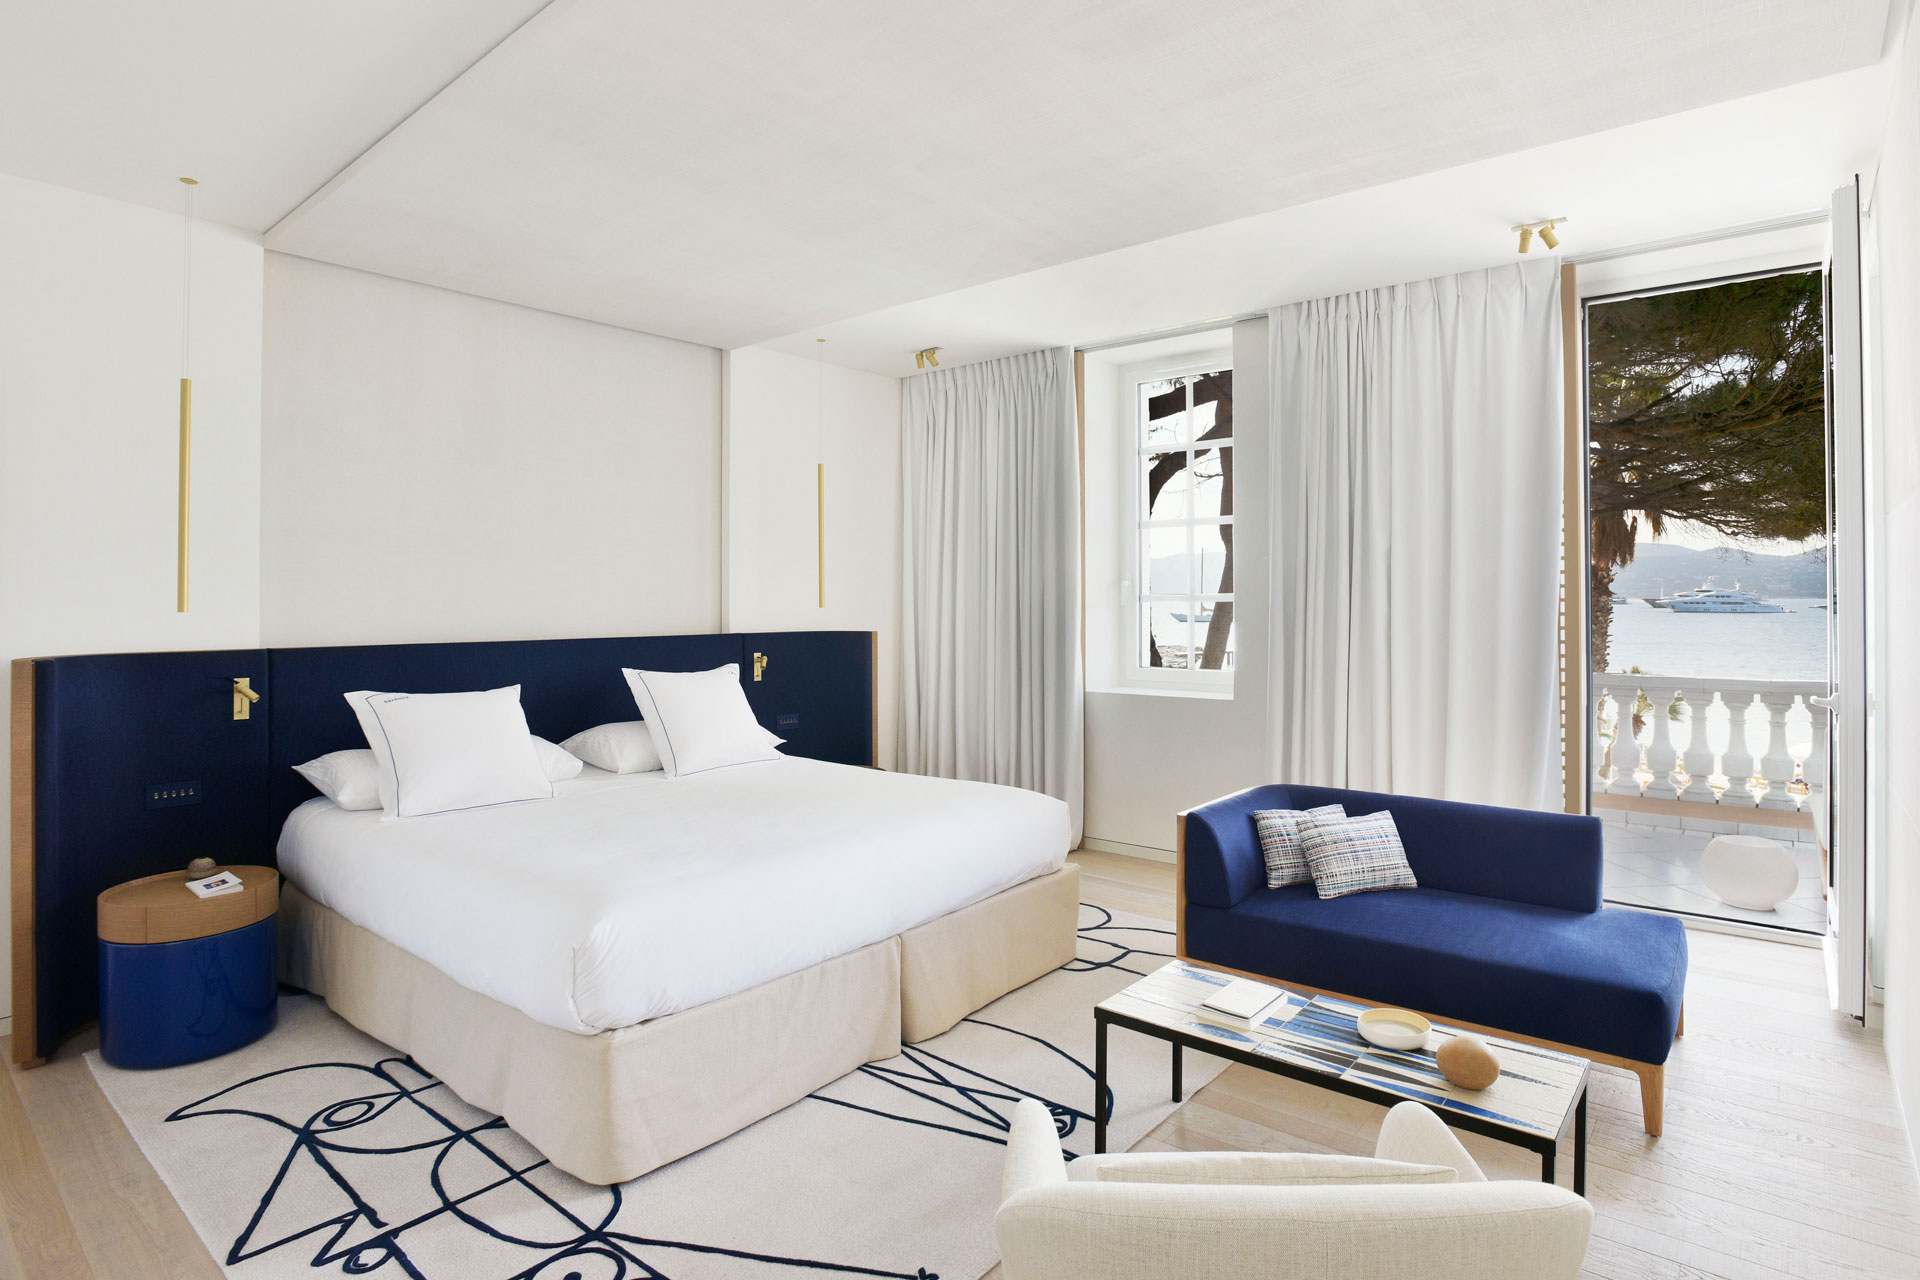 Duplex suite with blue and white furnishings at Cheval Blanc St Tropez